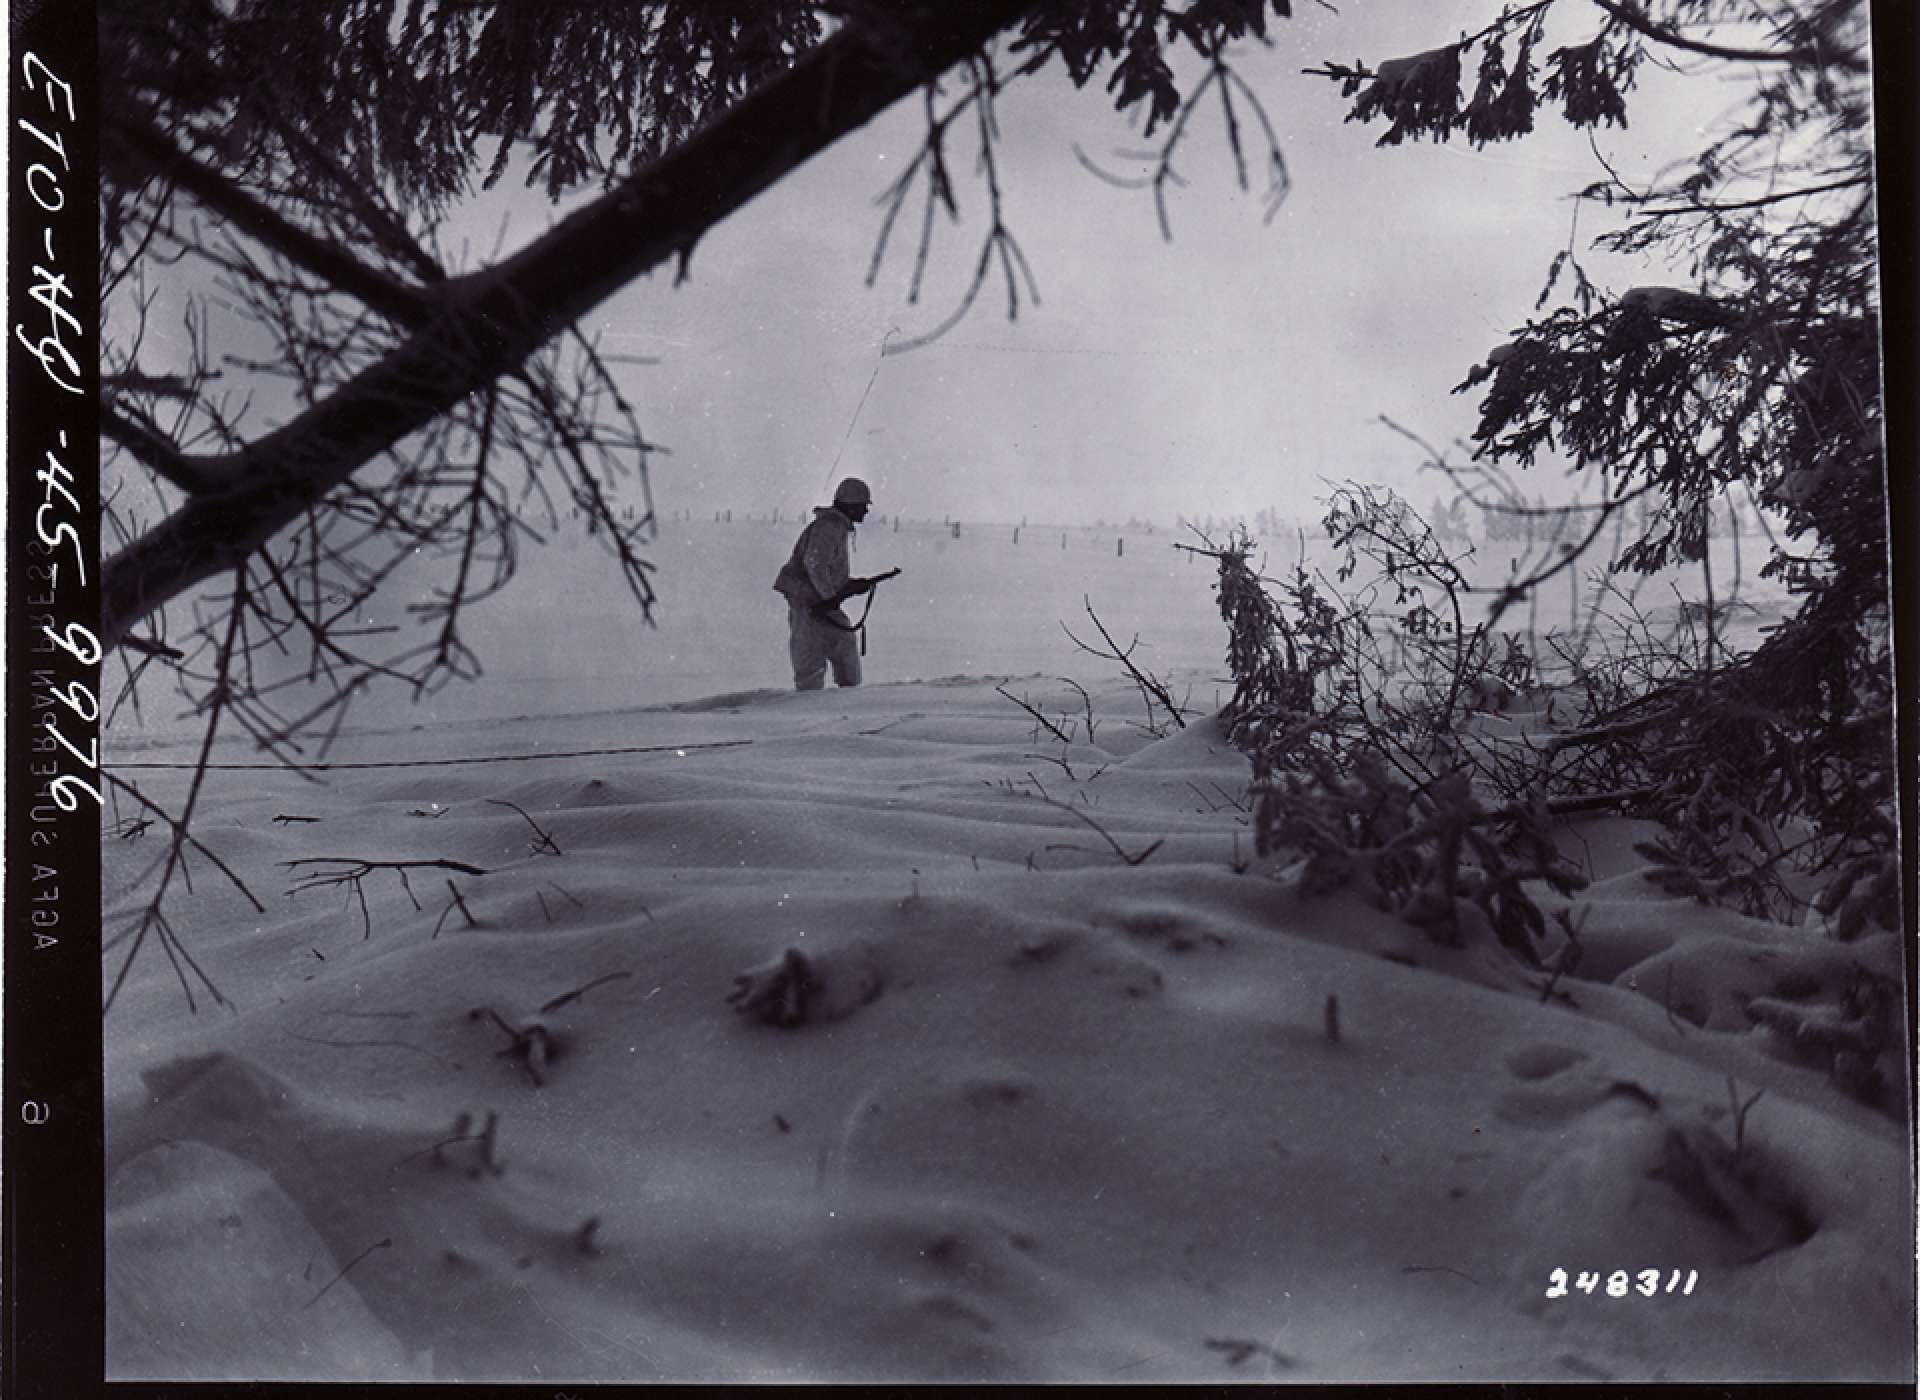 1st Infantry Division soldier on patrol near Bullingen, Belgium. The National WWII Museum Digital Collections.